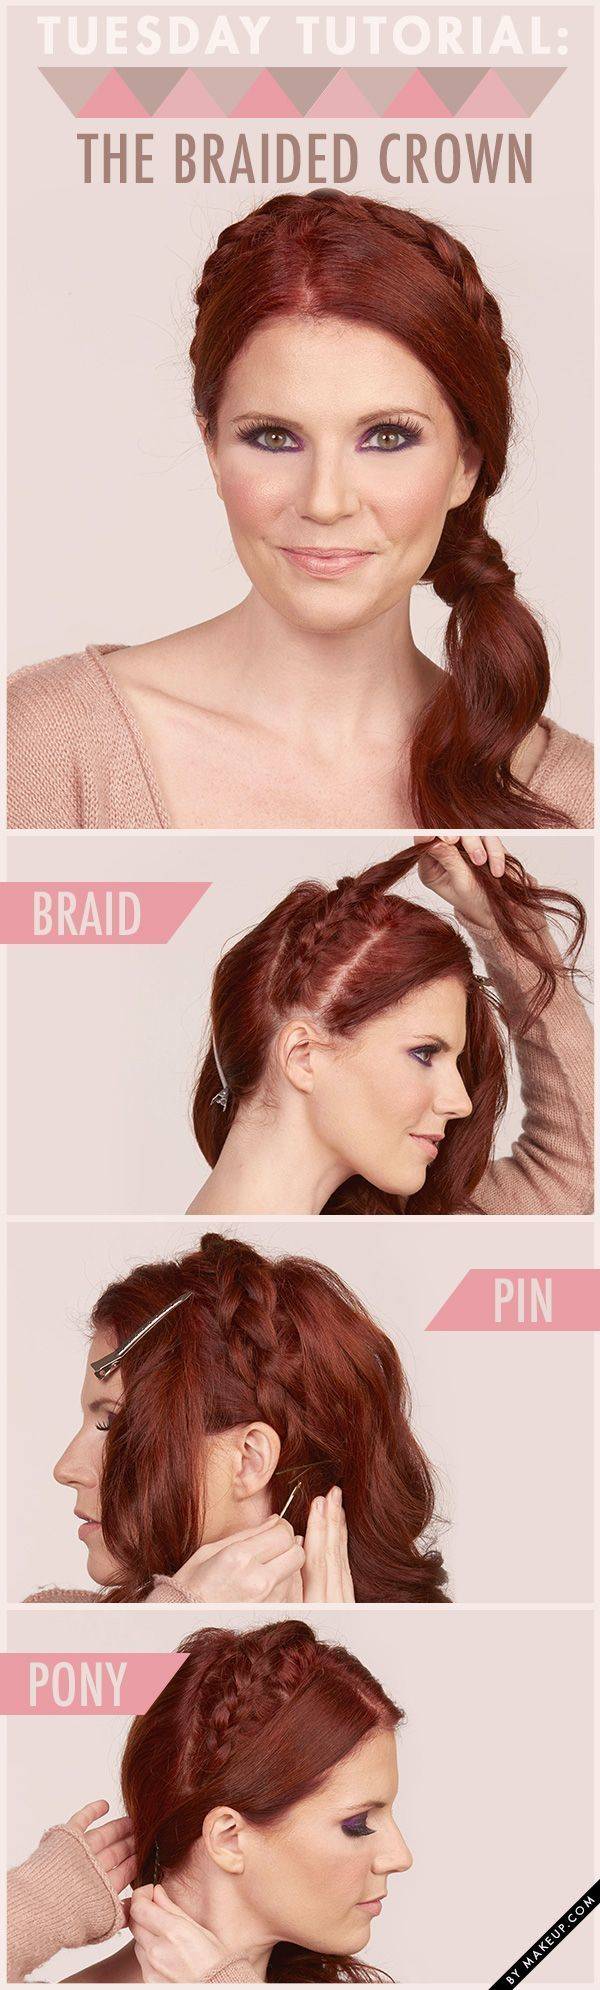 https://image.sistacafe.com/images/uploads/content_image/image/39714/1443080541-15-stylish-mermaid-hairstyles-to-pair-your-looks6.jpg